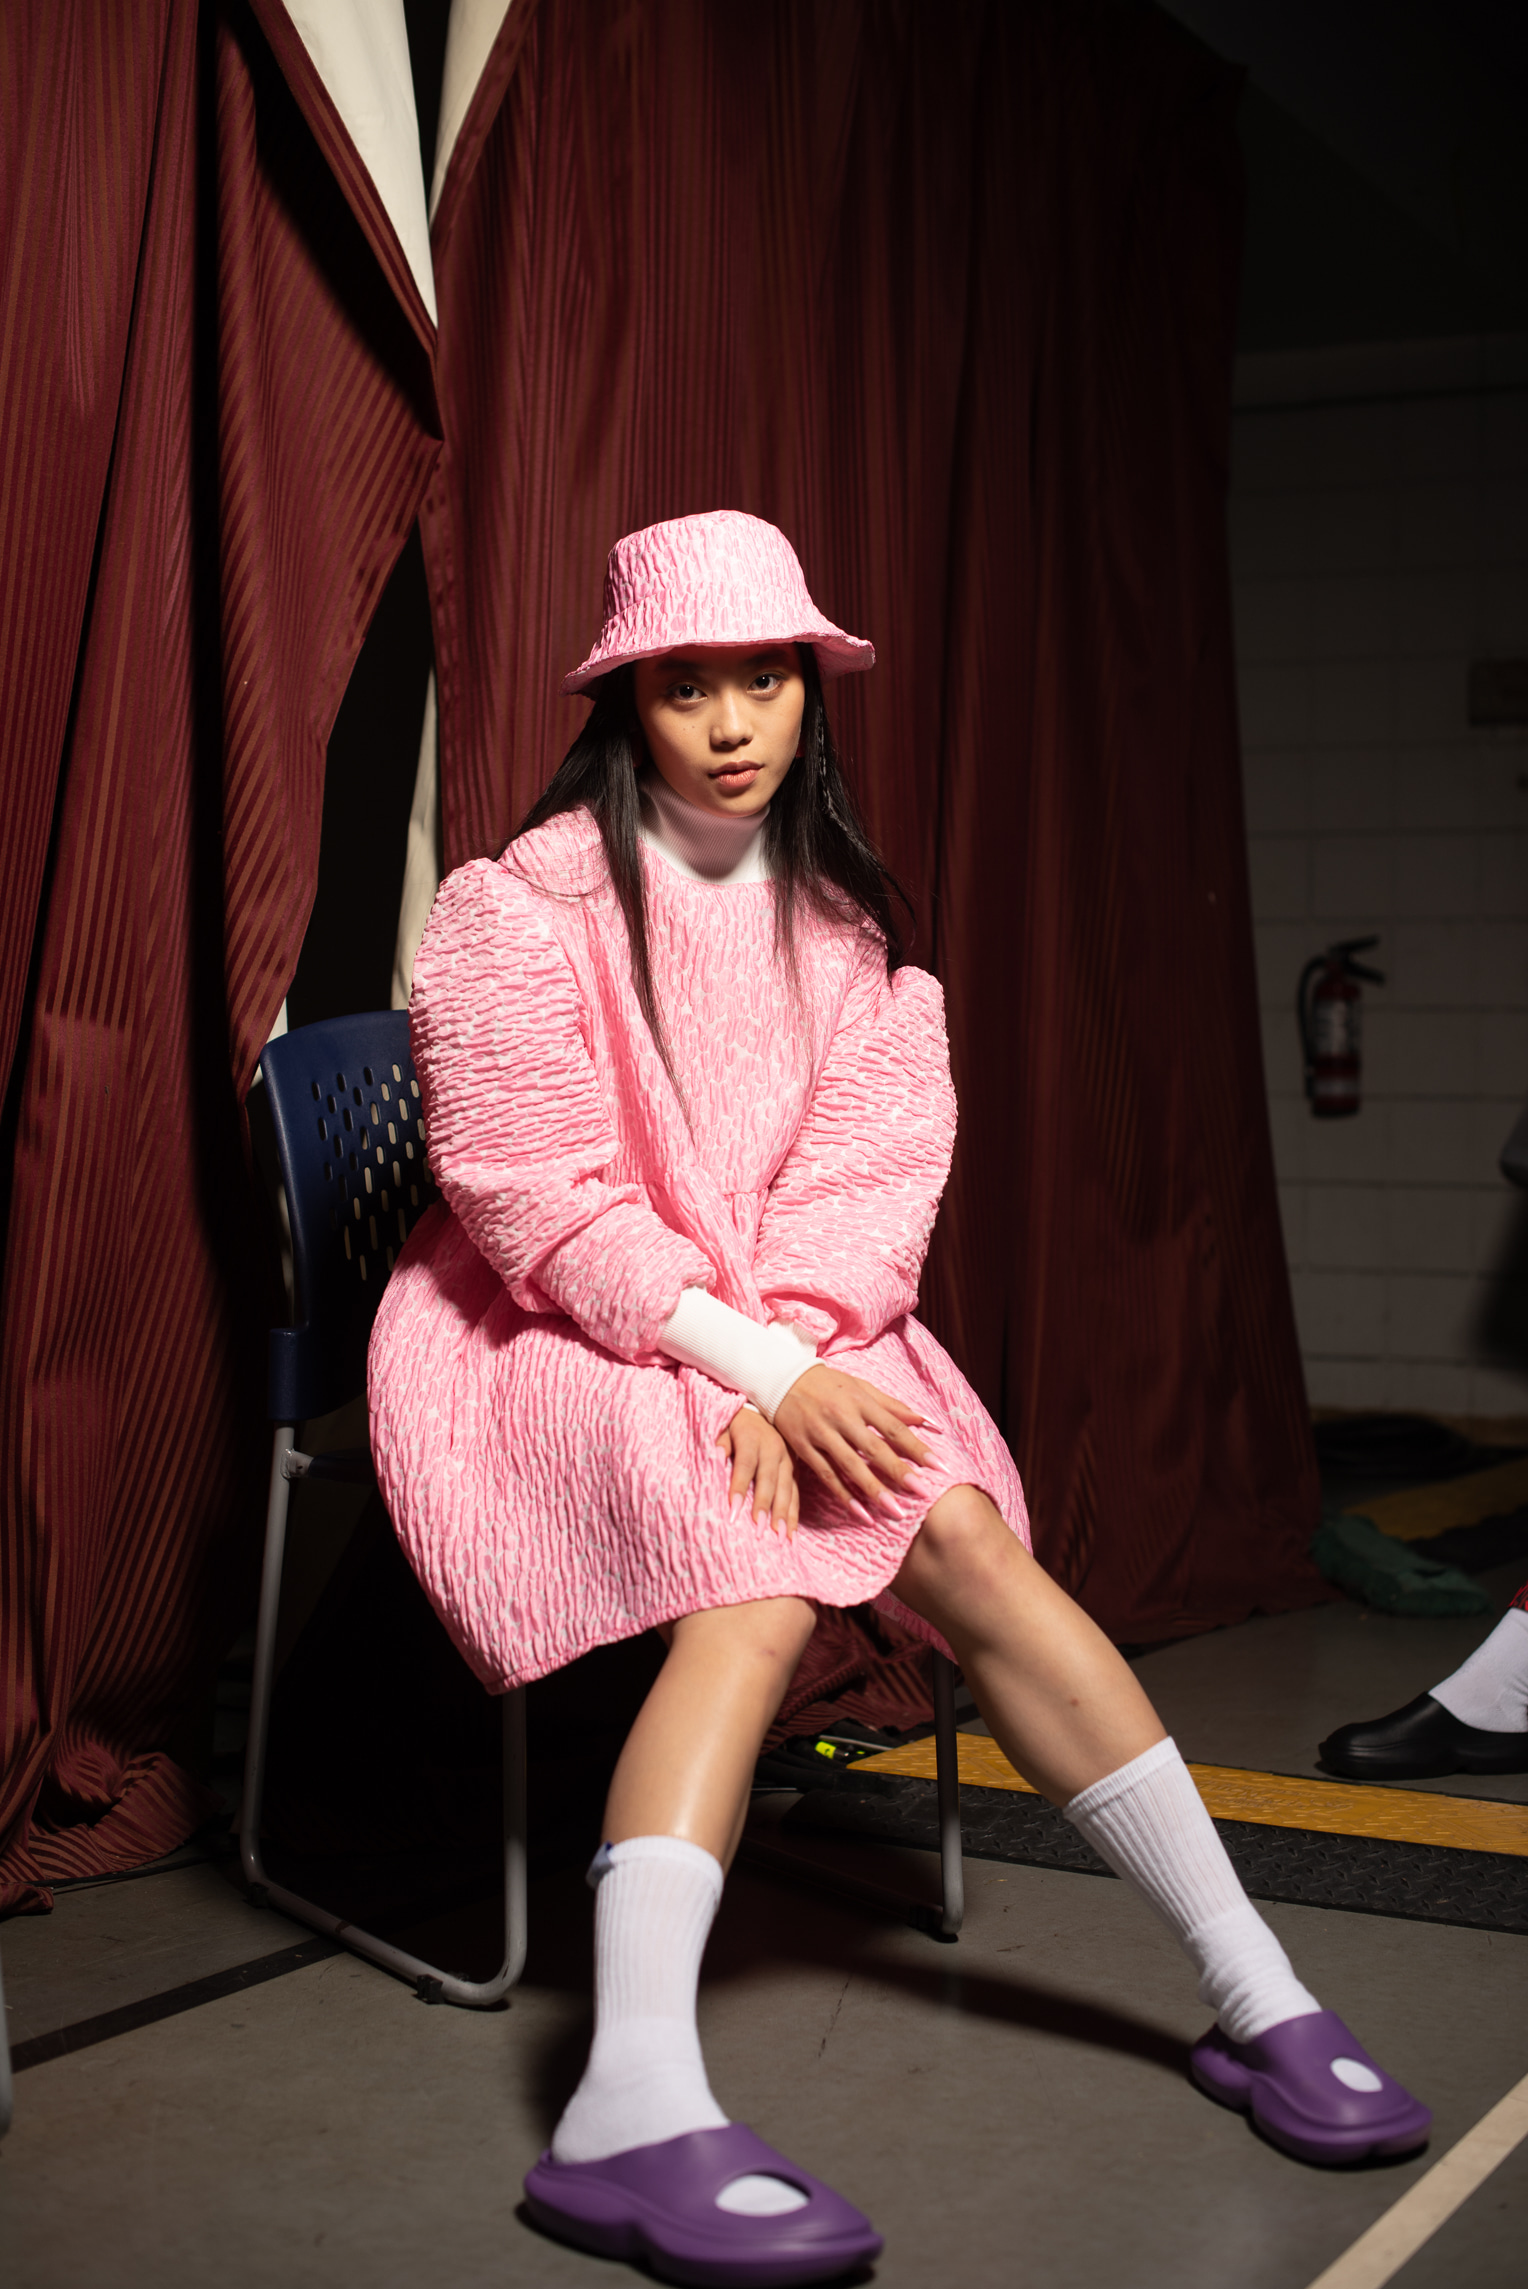 A model, wearing a bubbly pink dress and matching bucket hat, sits backstage with her arms in her lap. She stares directly at the camera